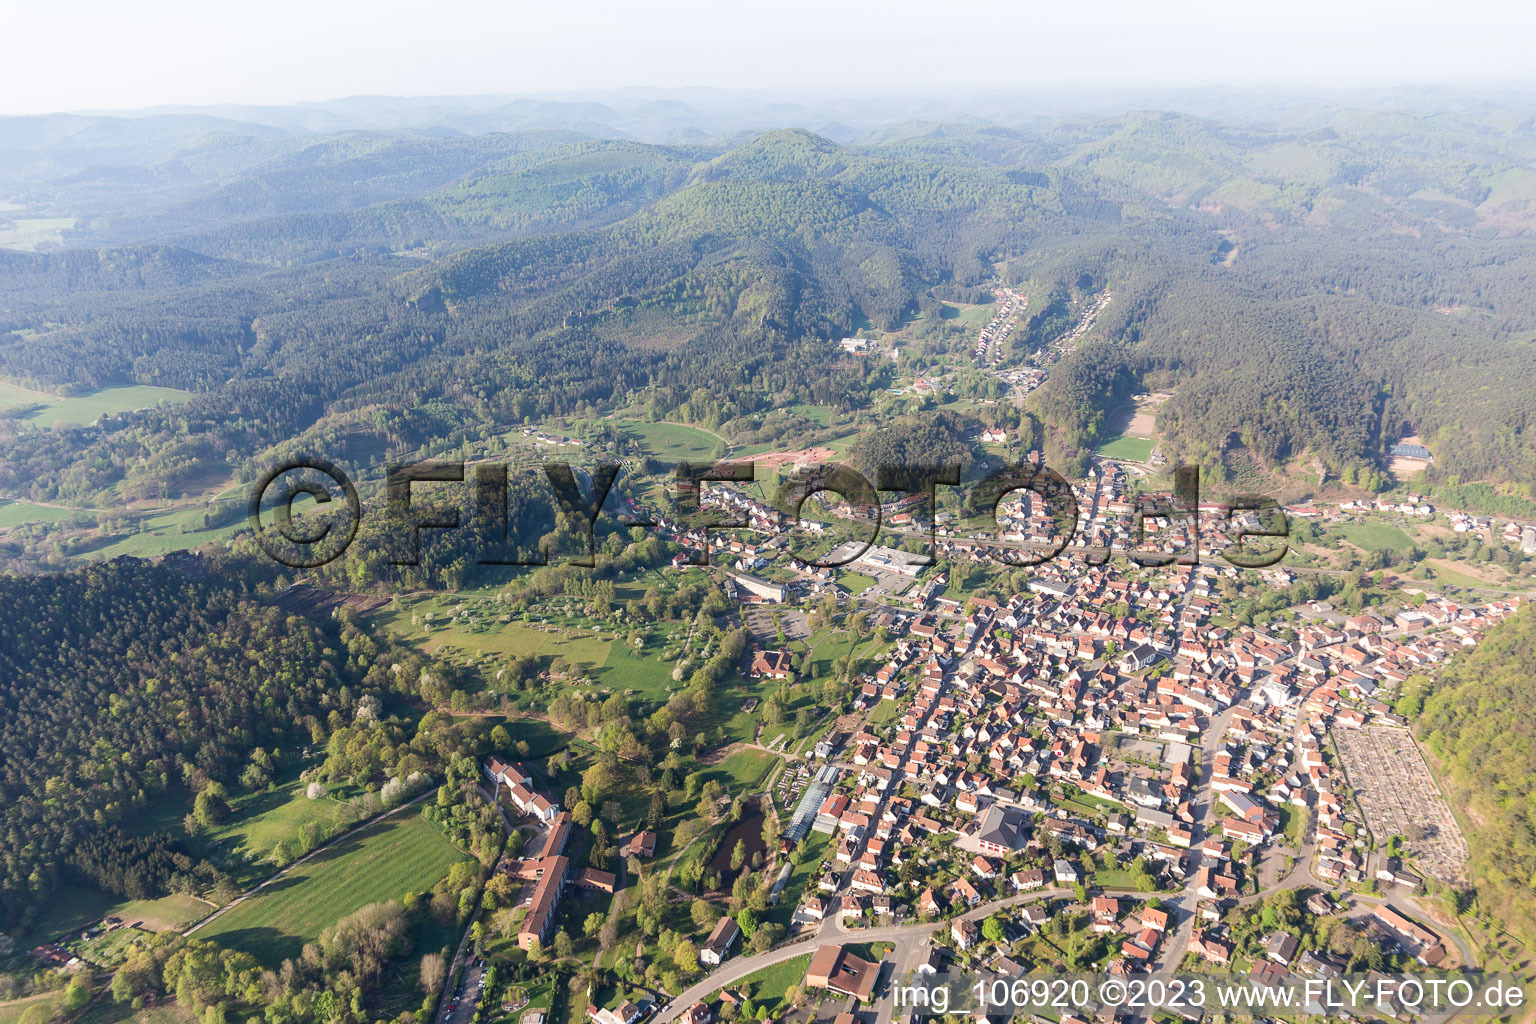 Dahn in the state Rhineland-Palatinate, Germany viewn from the air